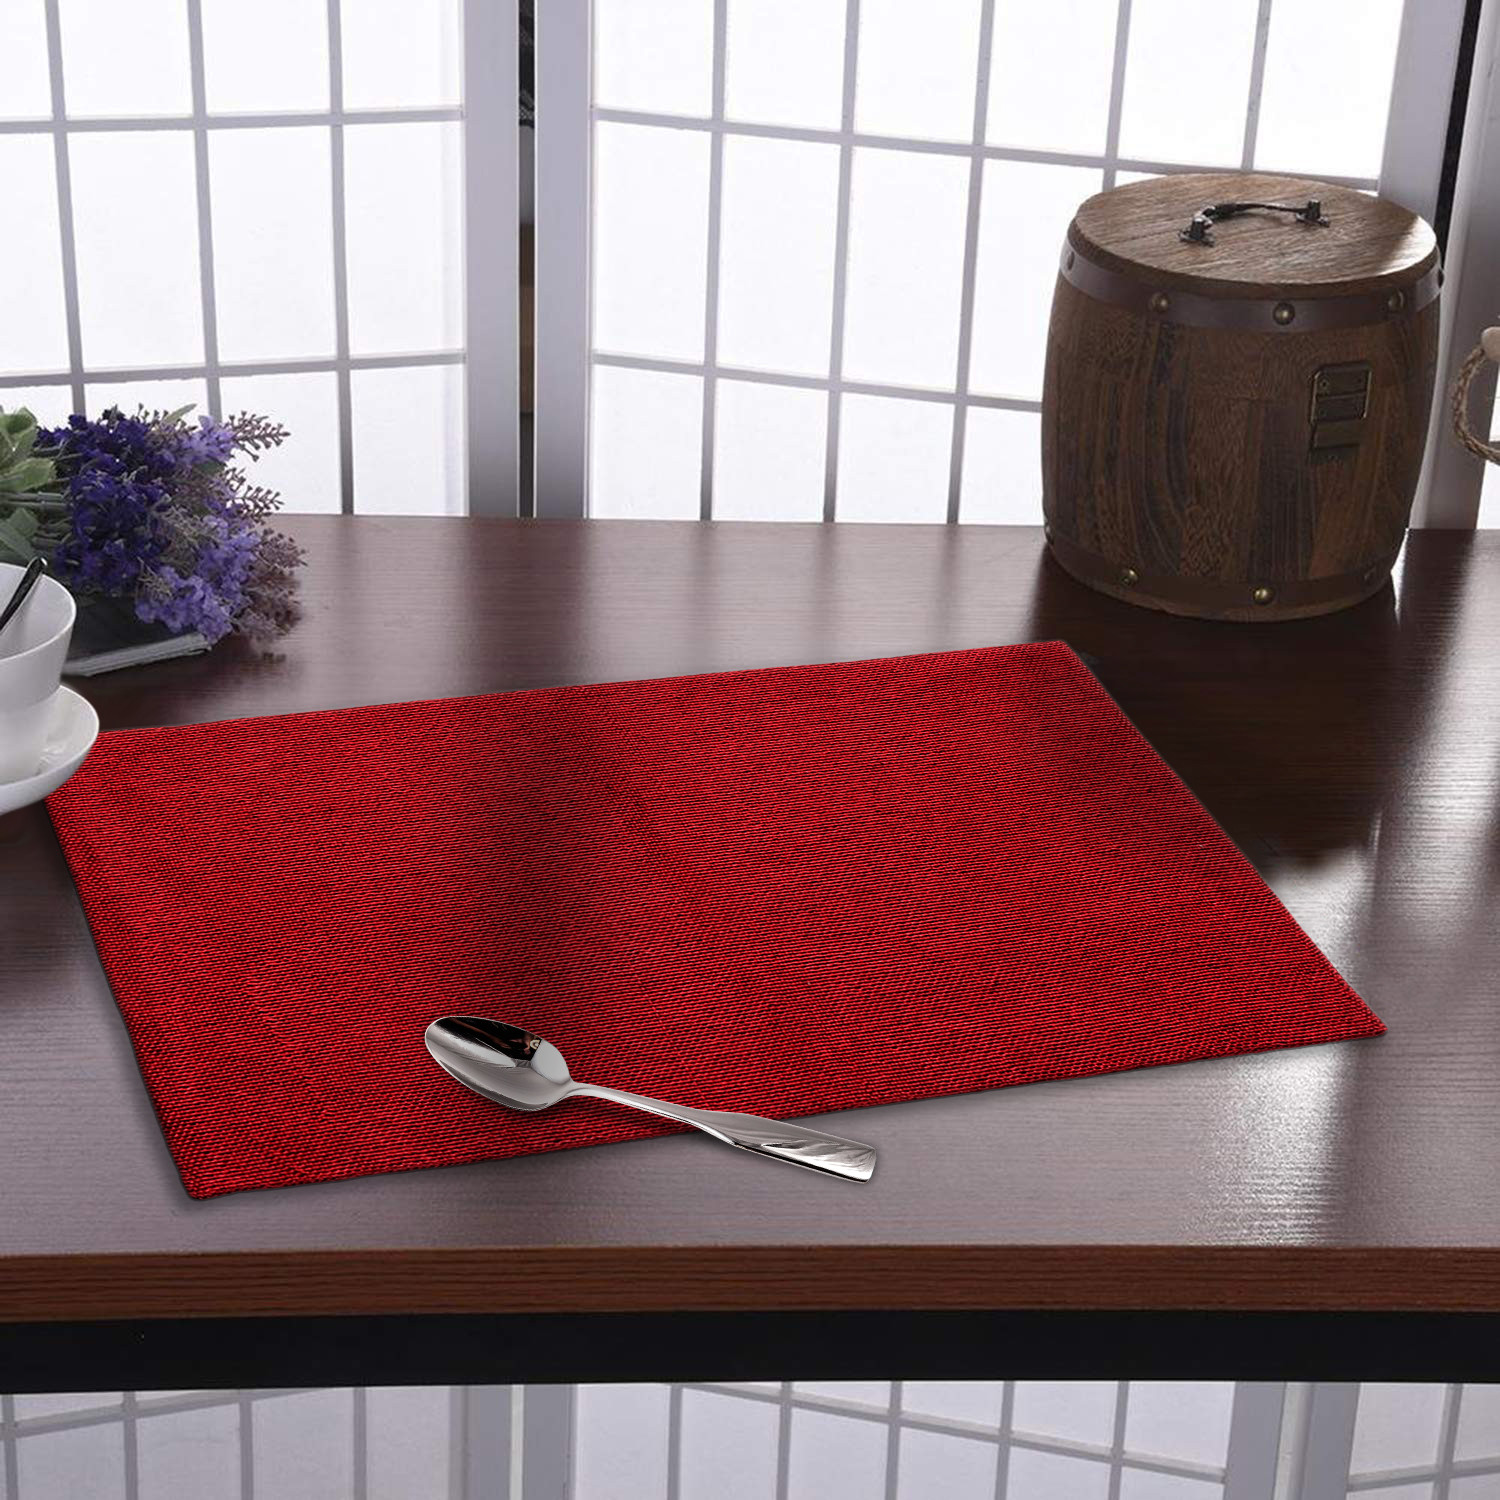 Kuber Industries Jute Table Placemat for Home, Hotels, Set of 6 (Maroon)